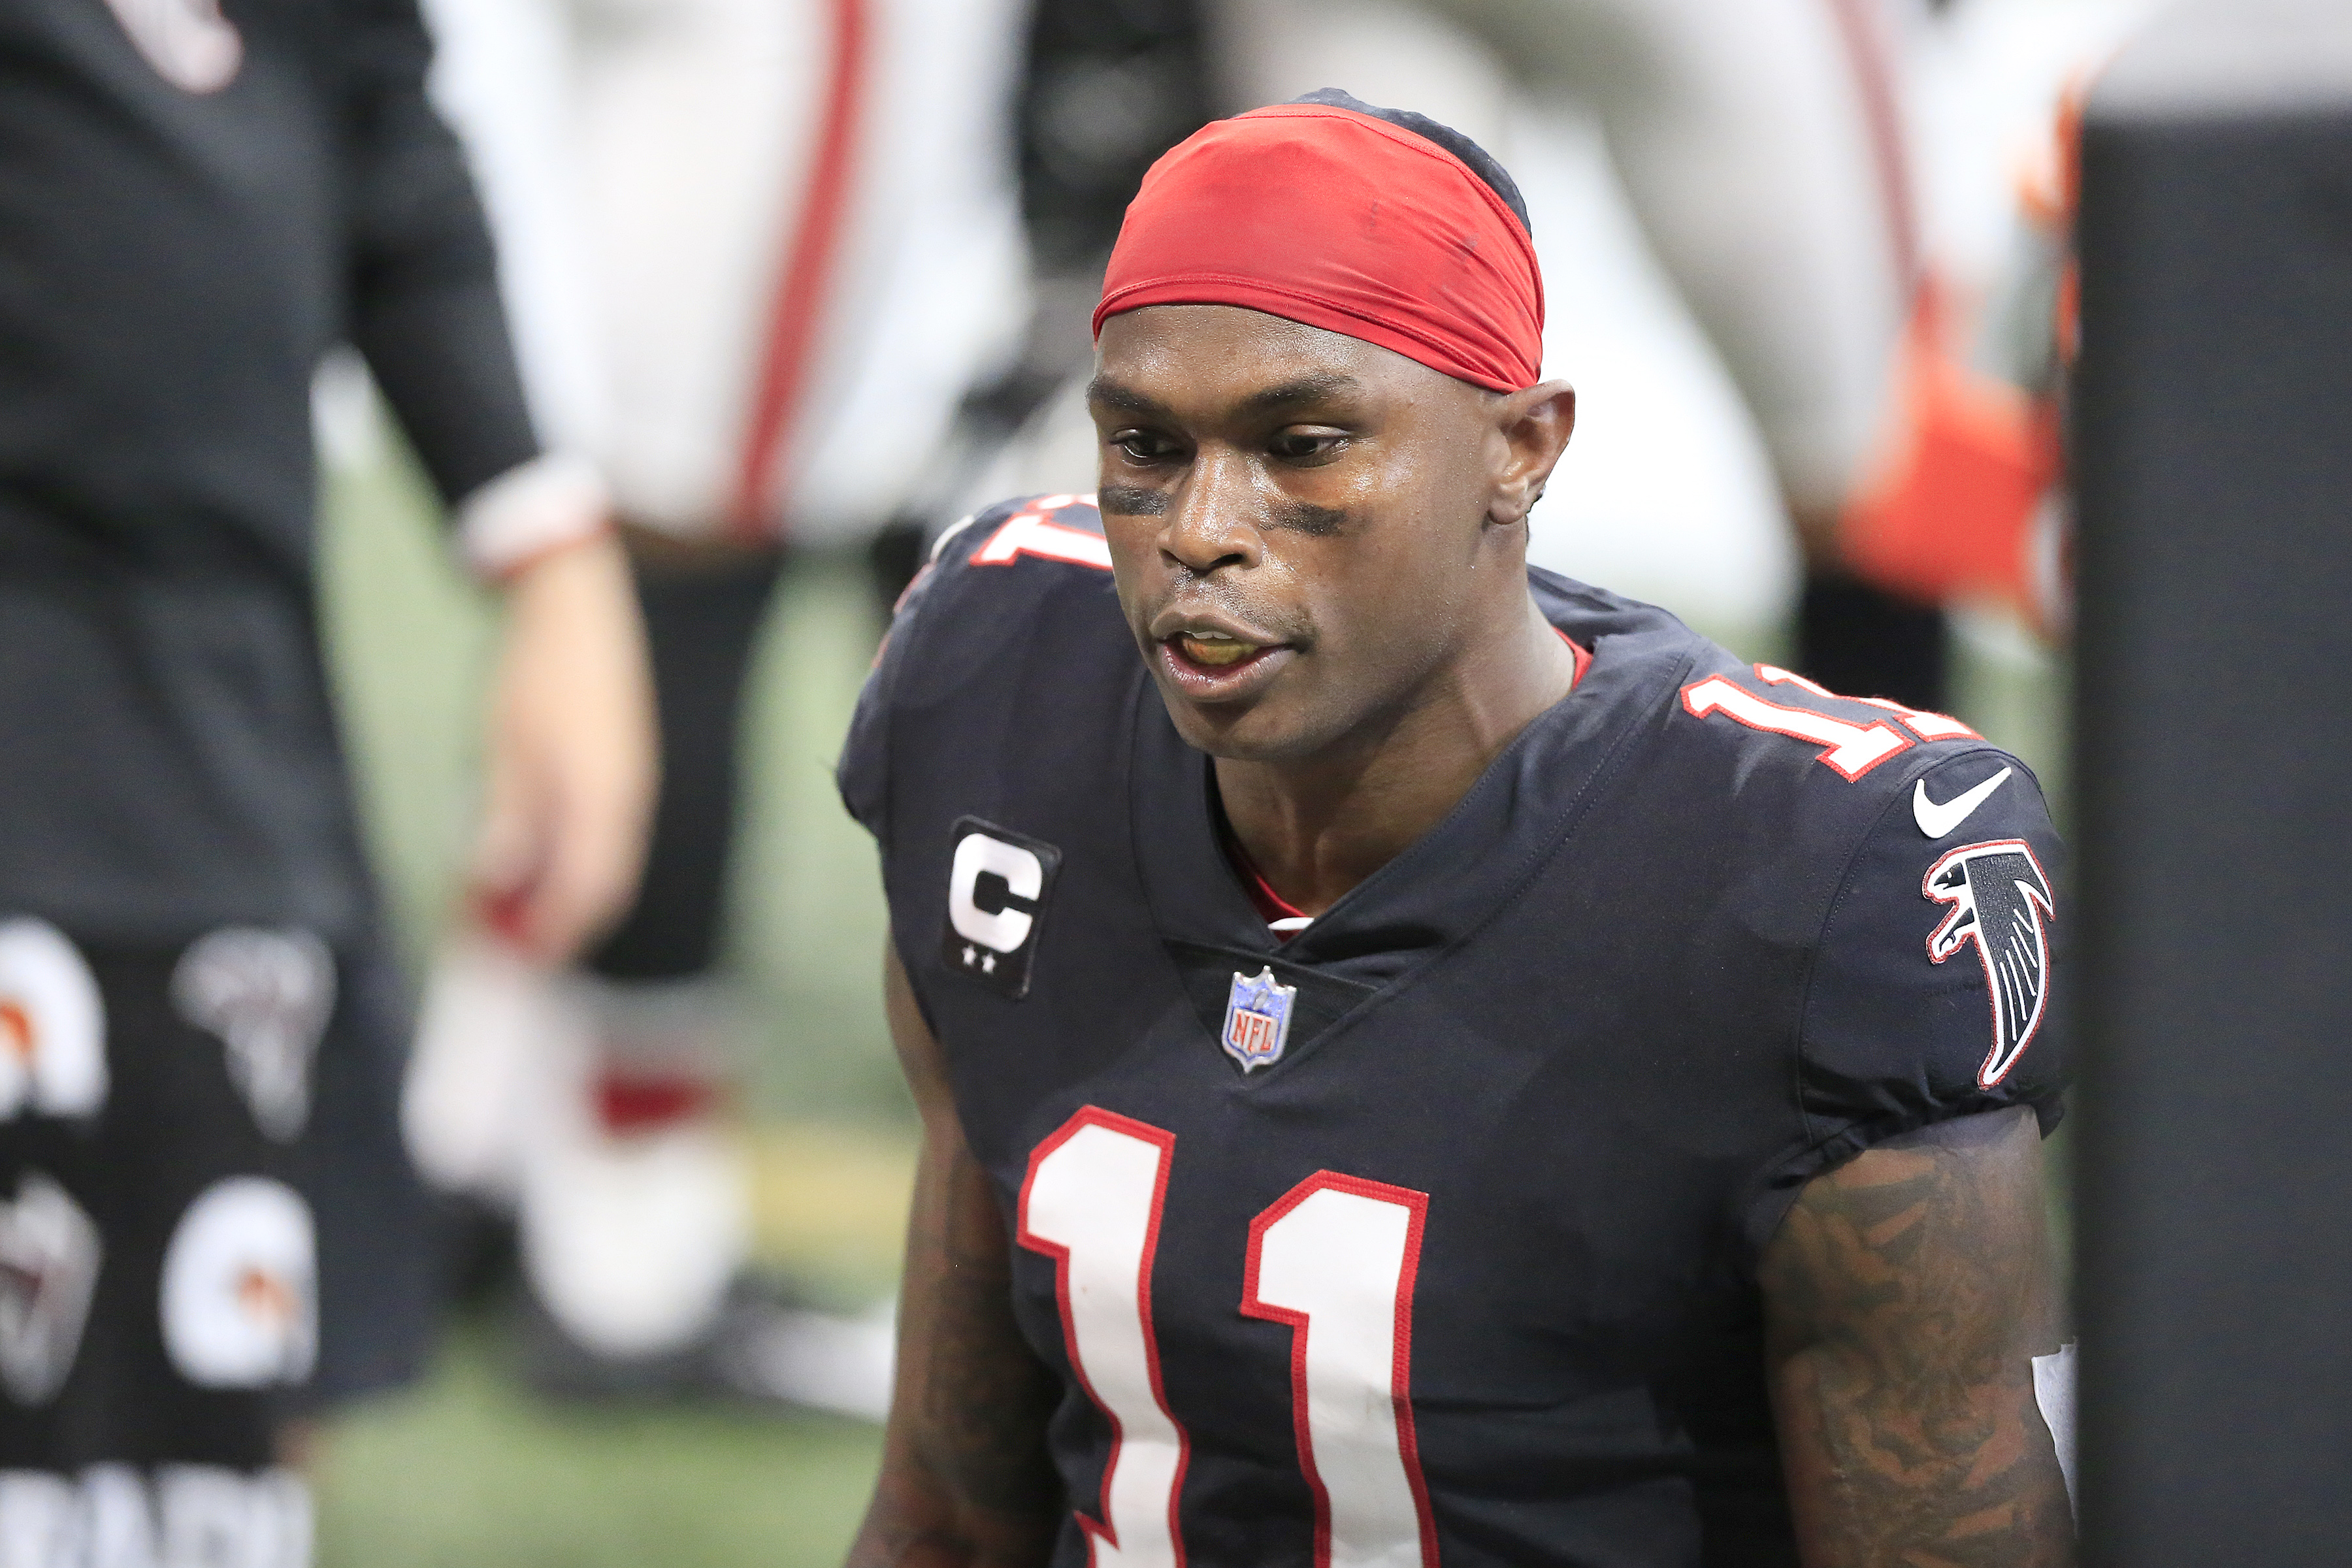 Do the Falcons have to trade All-Pro wide receiver Julio Jones?